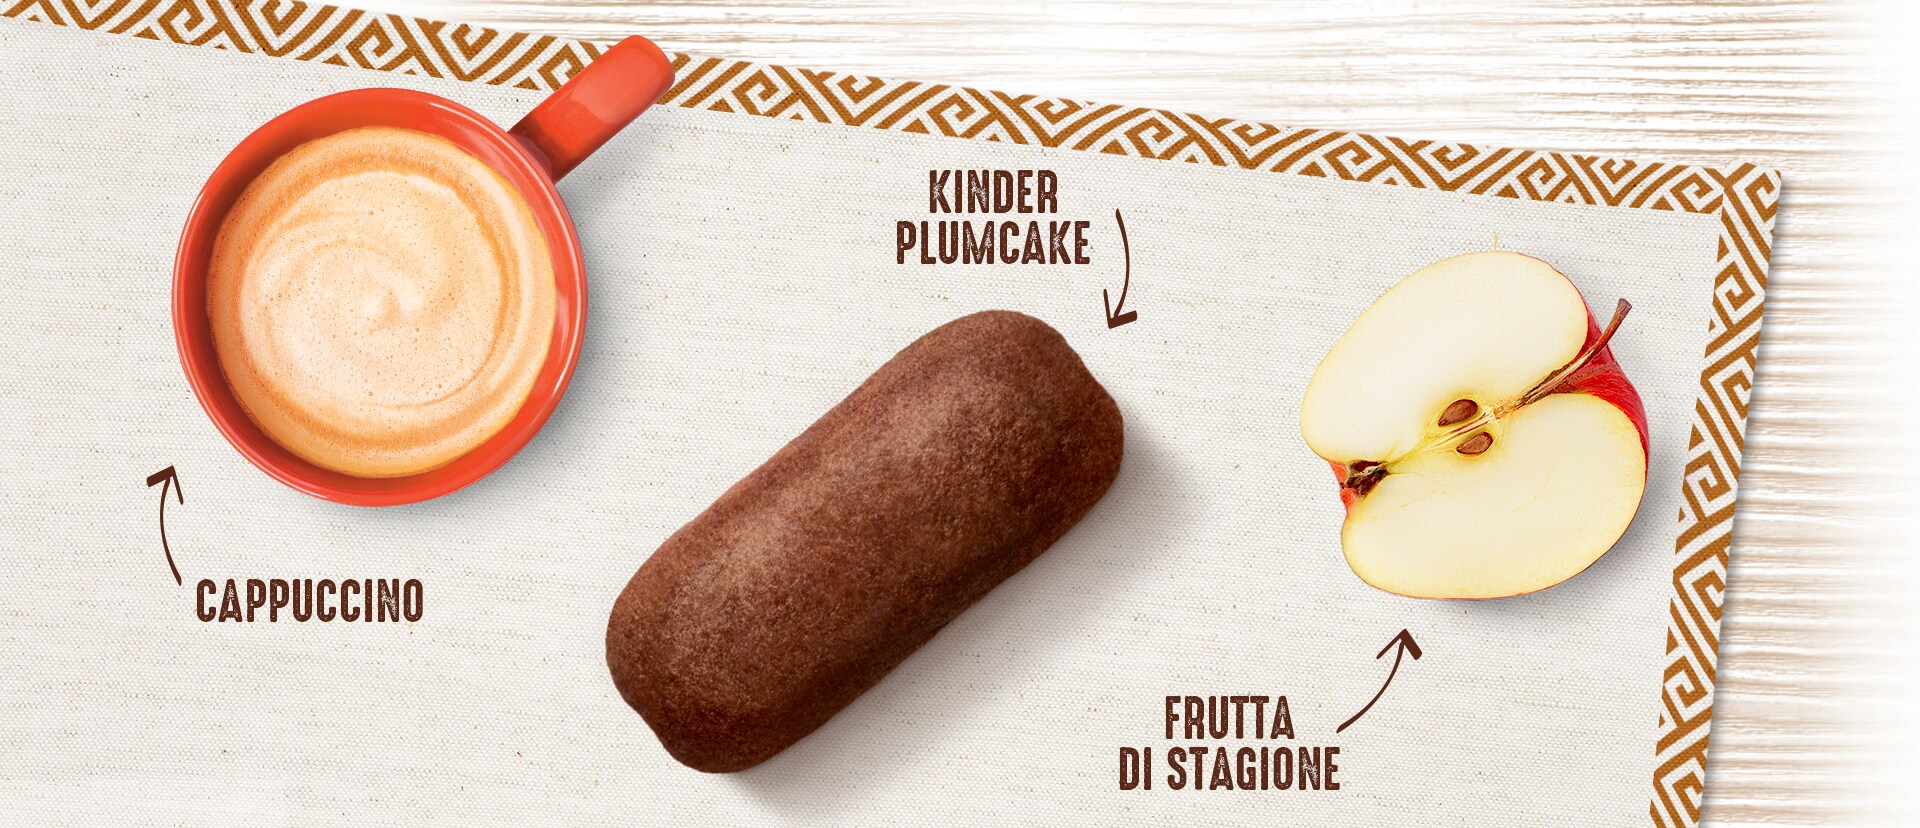 Plumcake cacao img footer